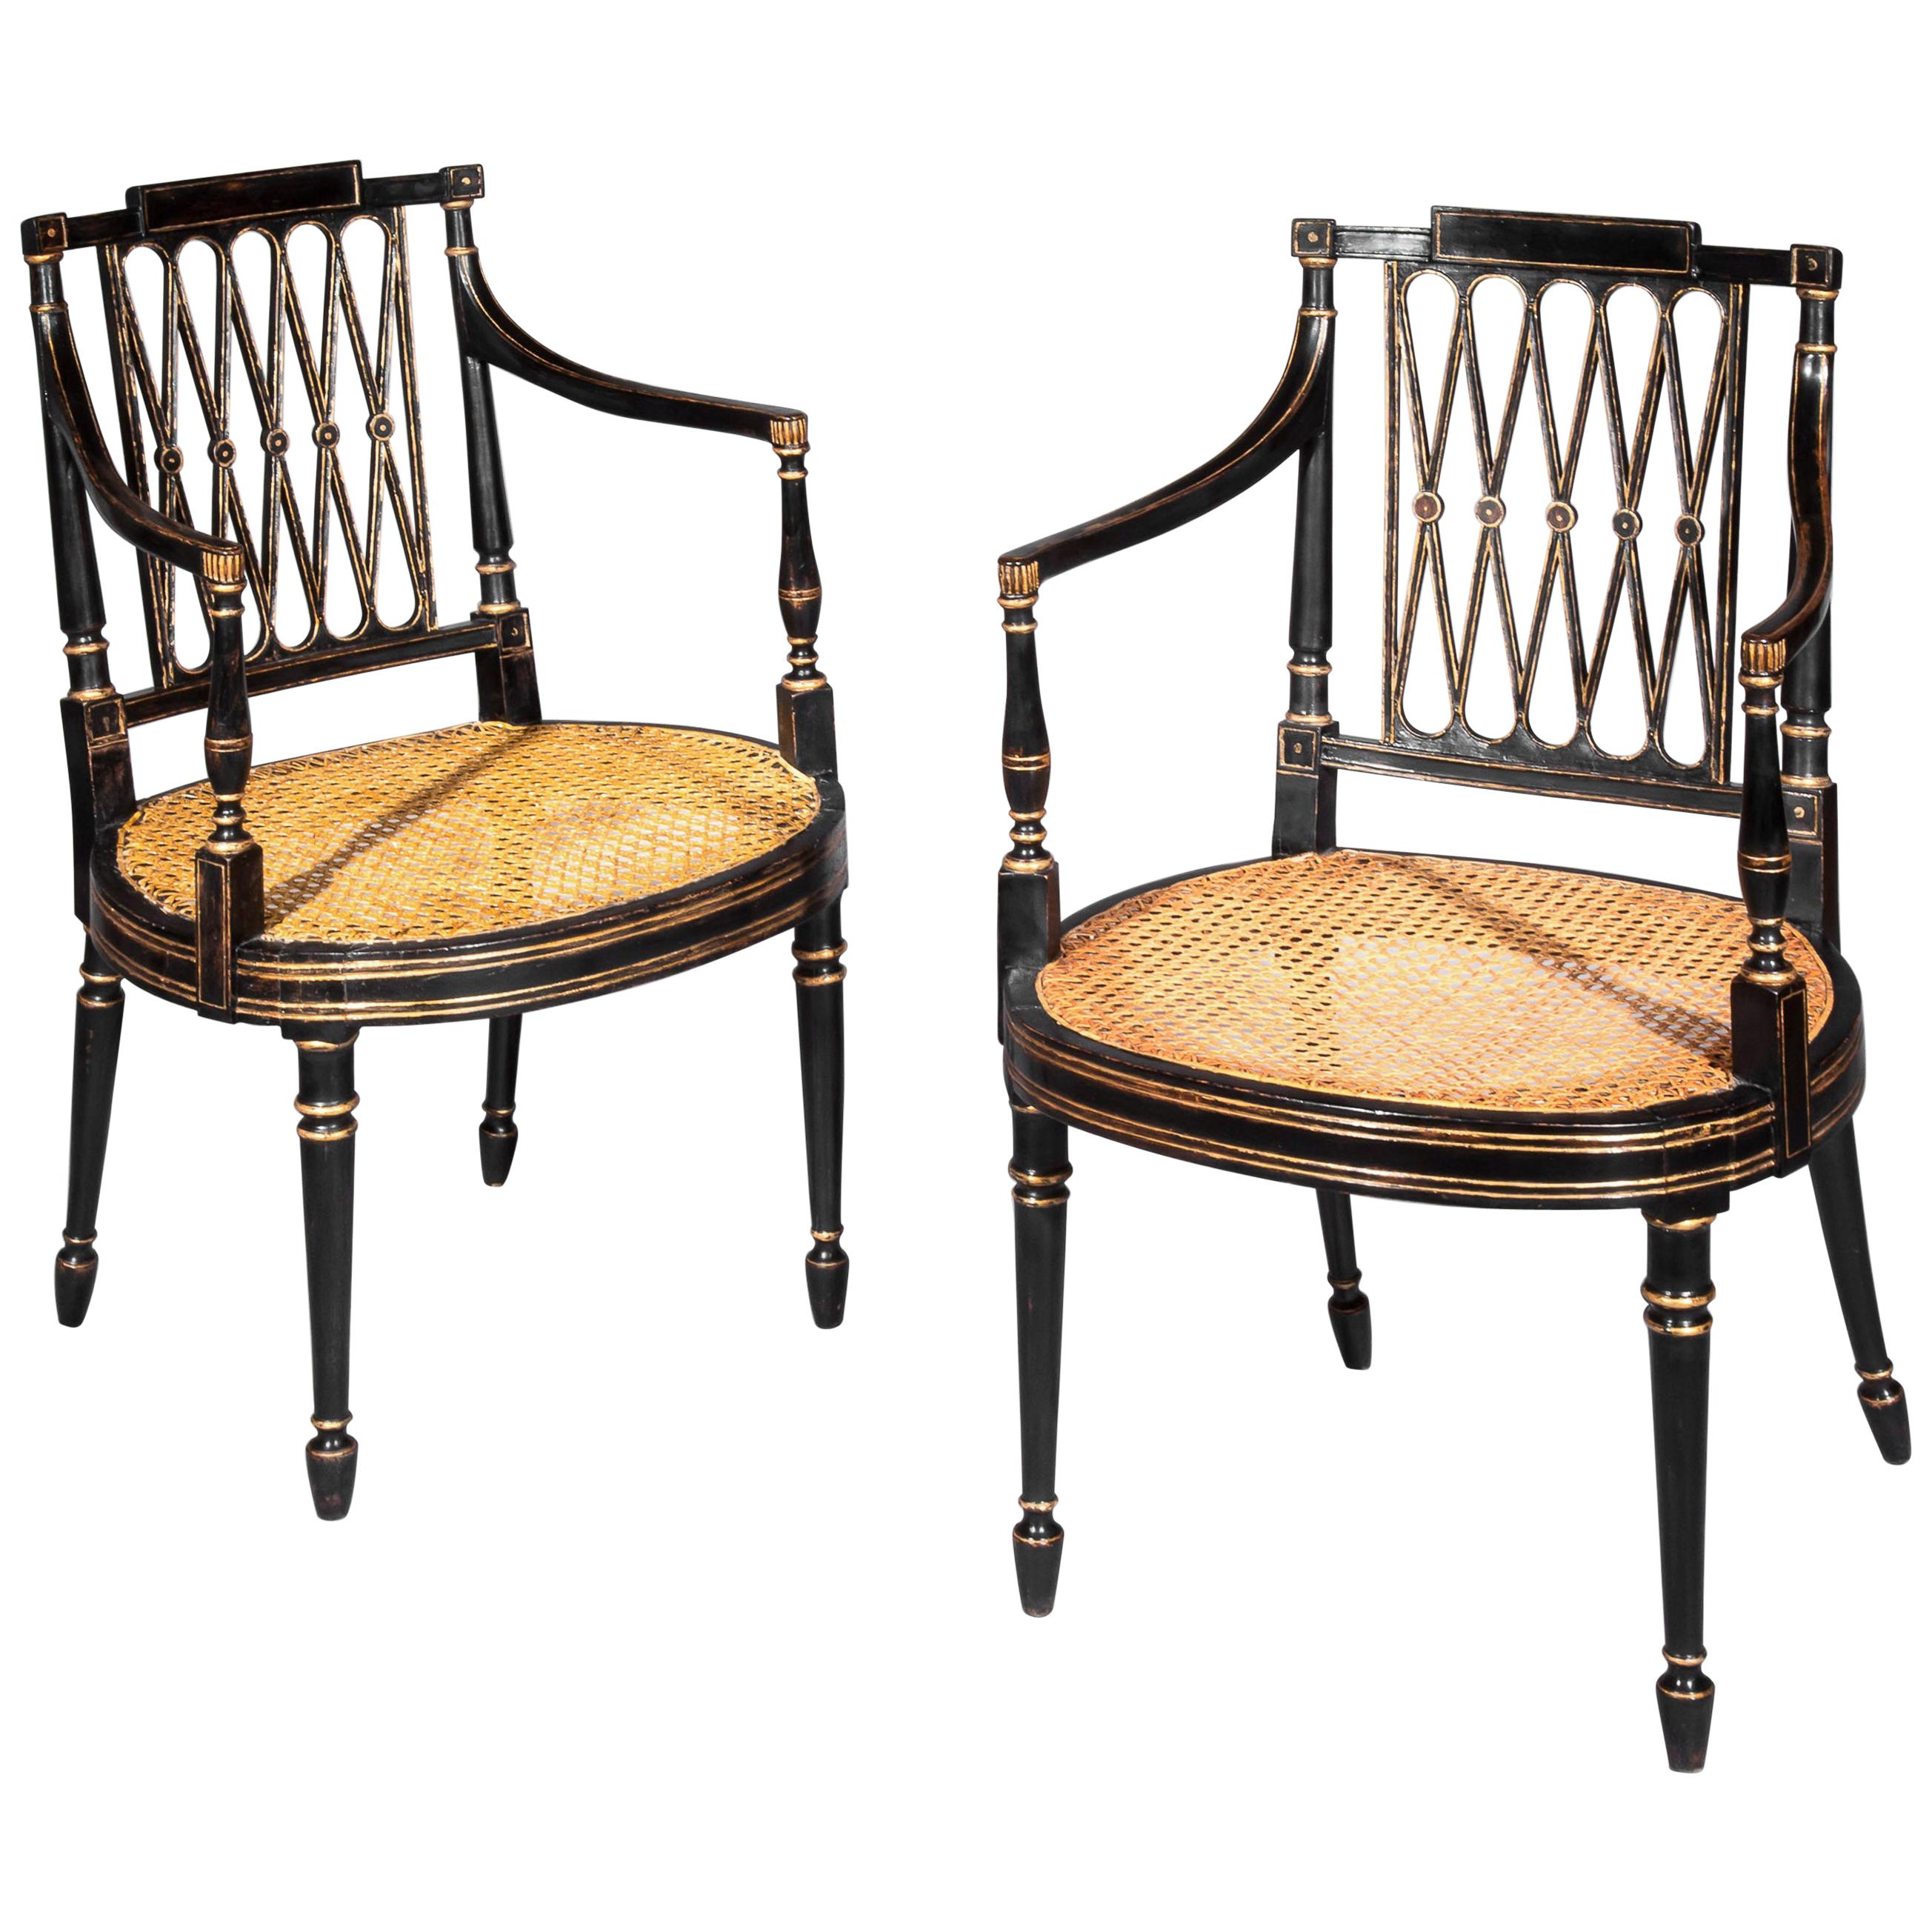 Pair of 18th Century George III Black Painted and Gilt Armchairs